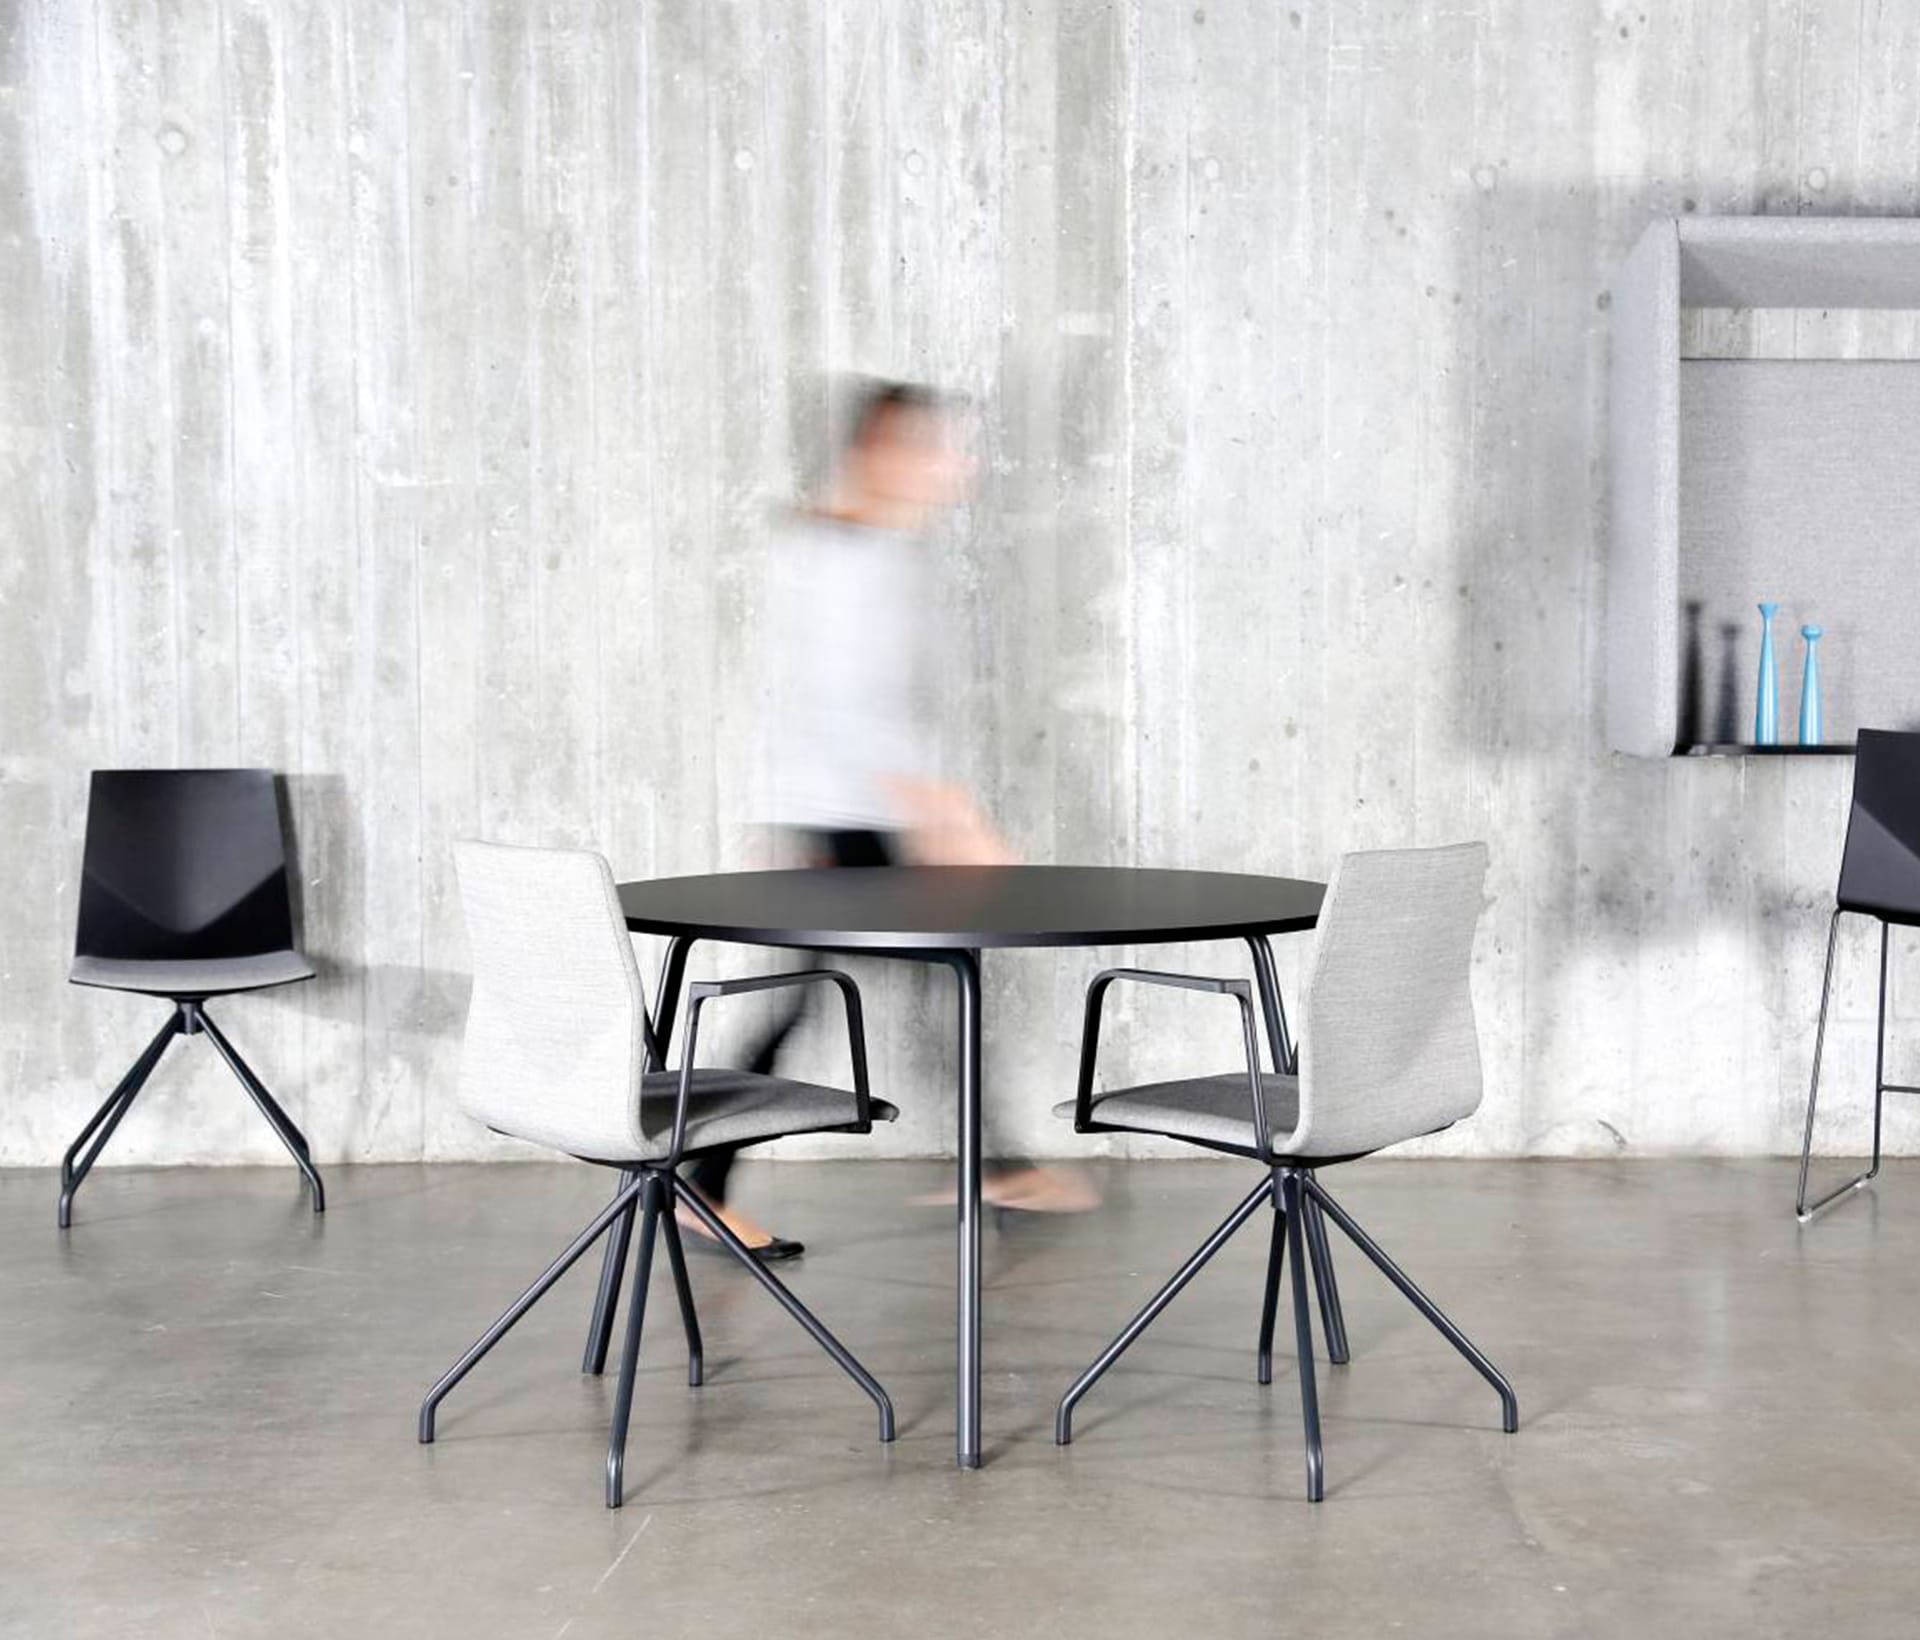 A person walks past a table and chairs in a concrete room.